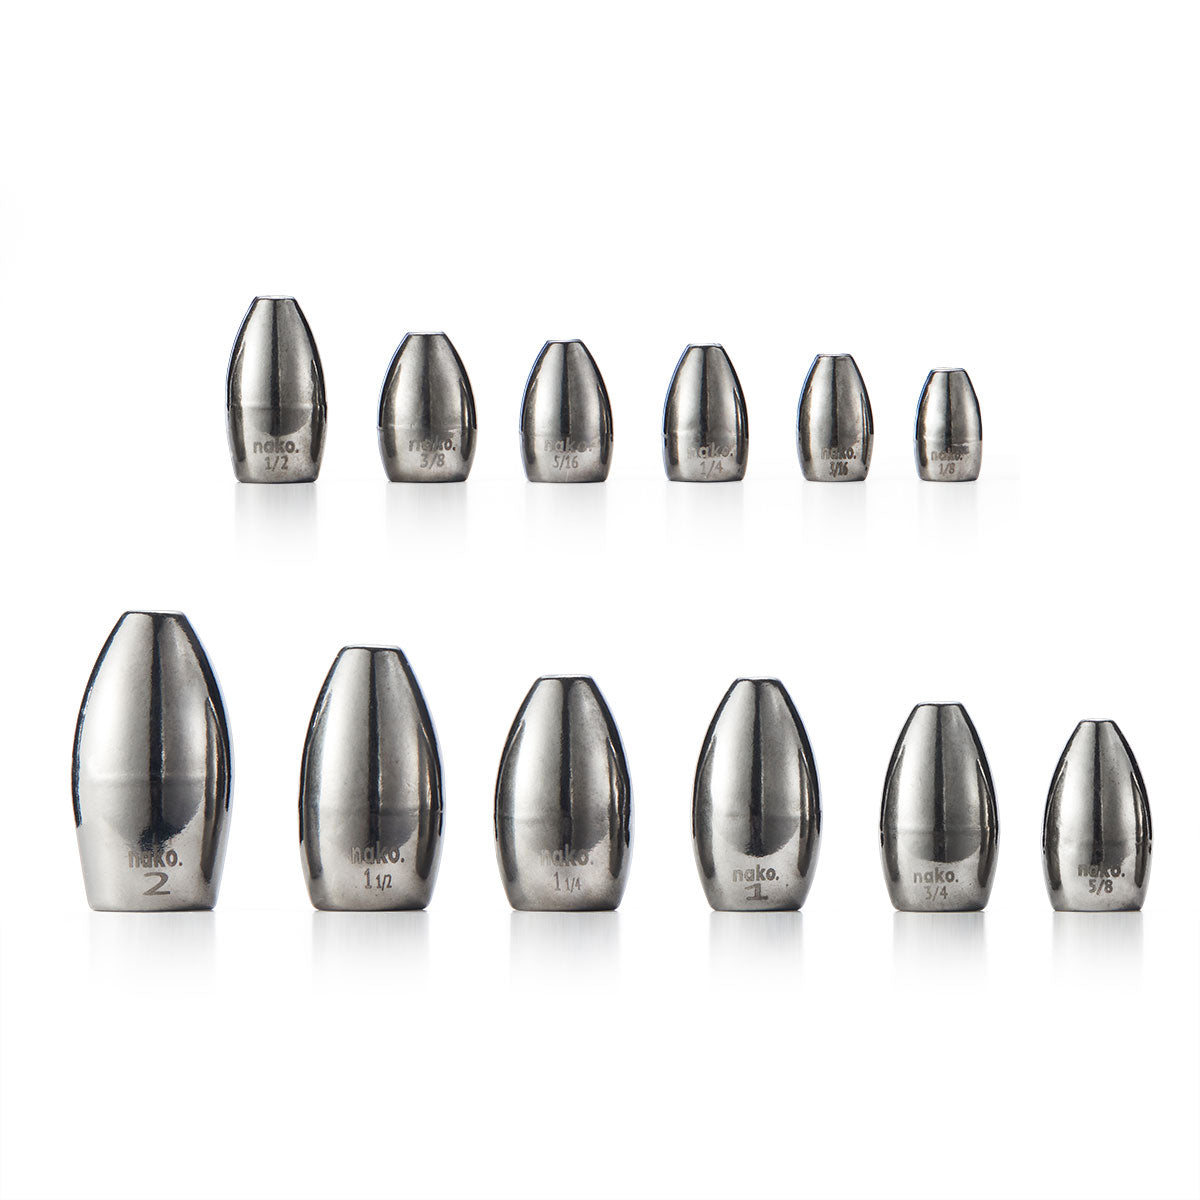 200% Sensitive Tungsten Flipping Weights | 4 Colors 10 Piece Bulk Pack, Silver / 1/8 oz (10 Pack)